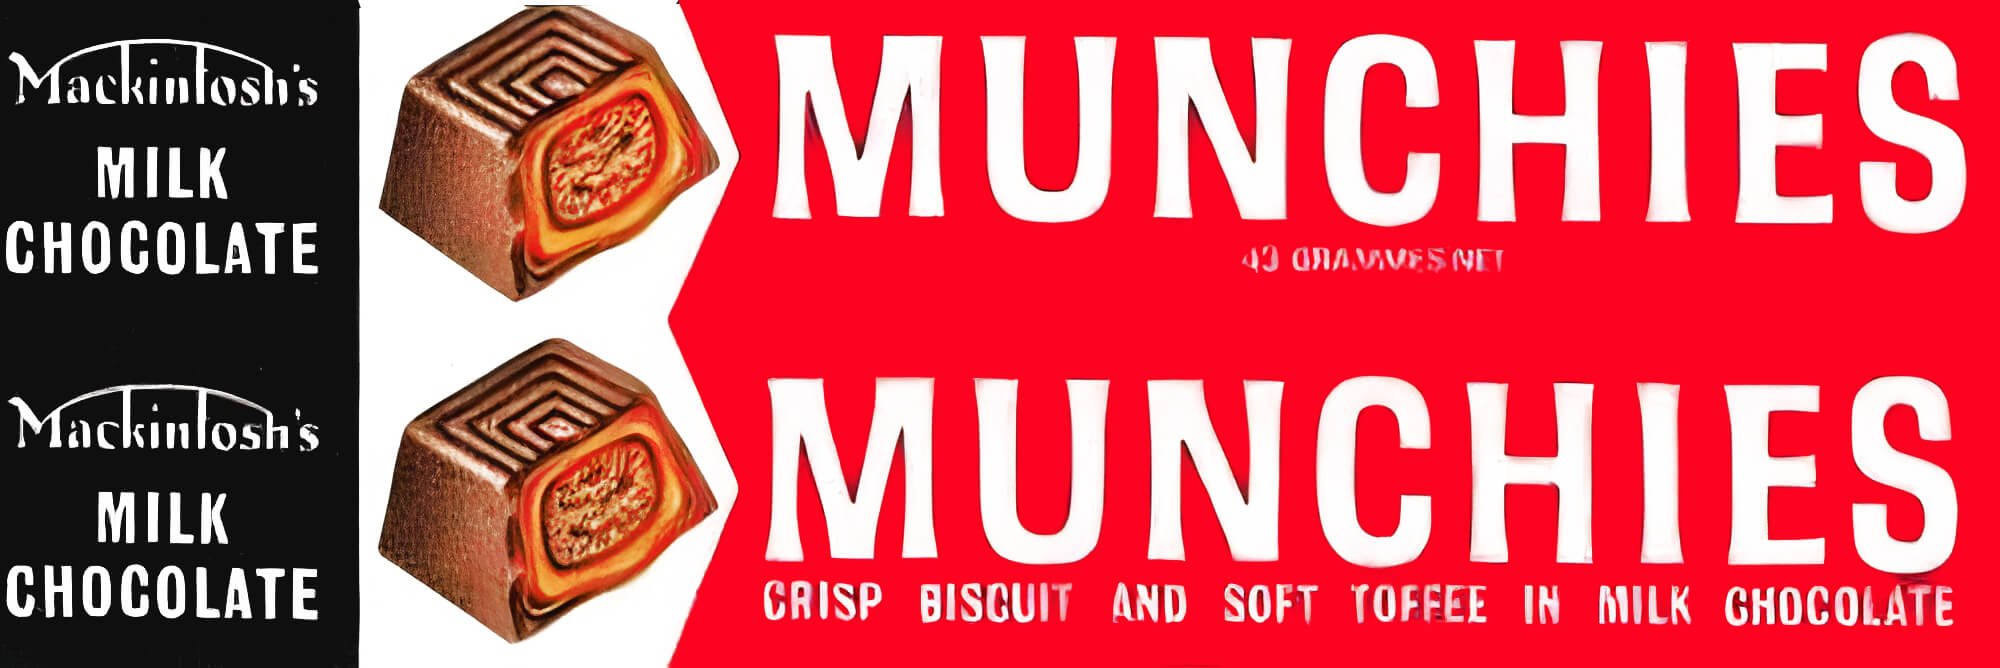 Mackintosh's Munchies wrapper 1960s. Red with white text and a black section on the left